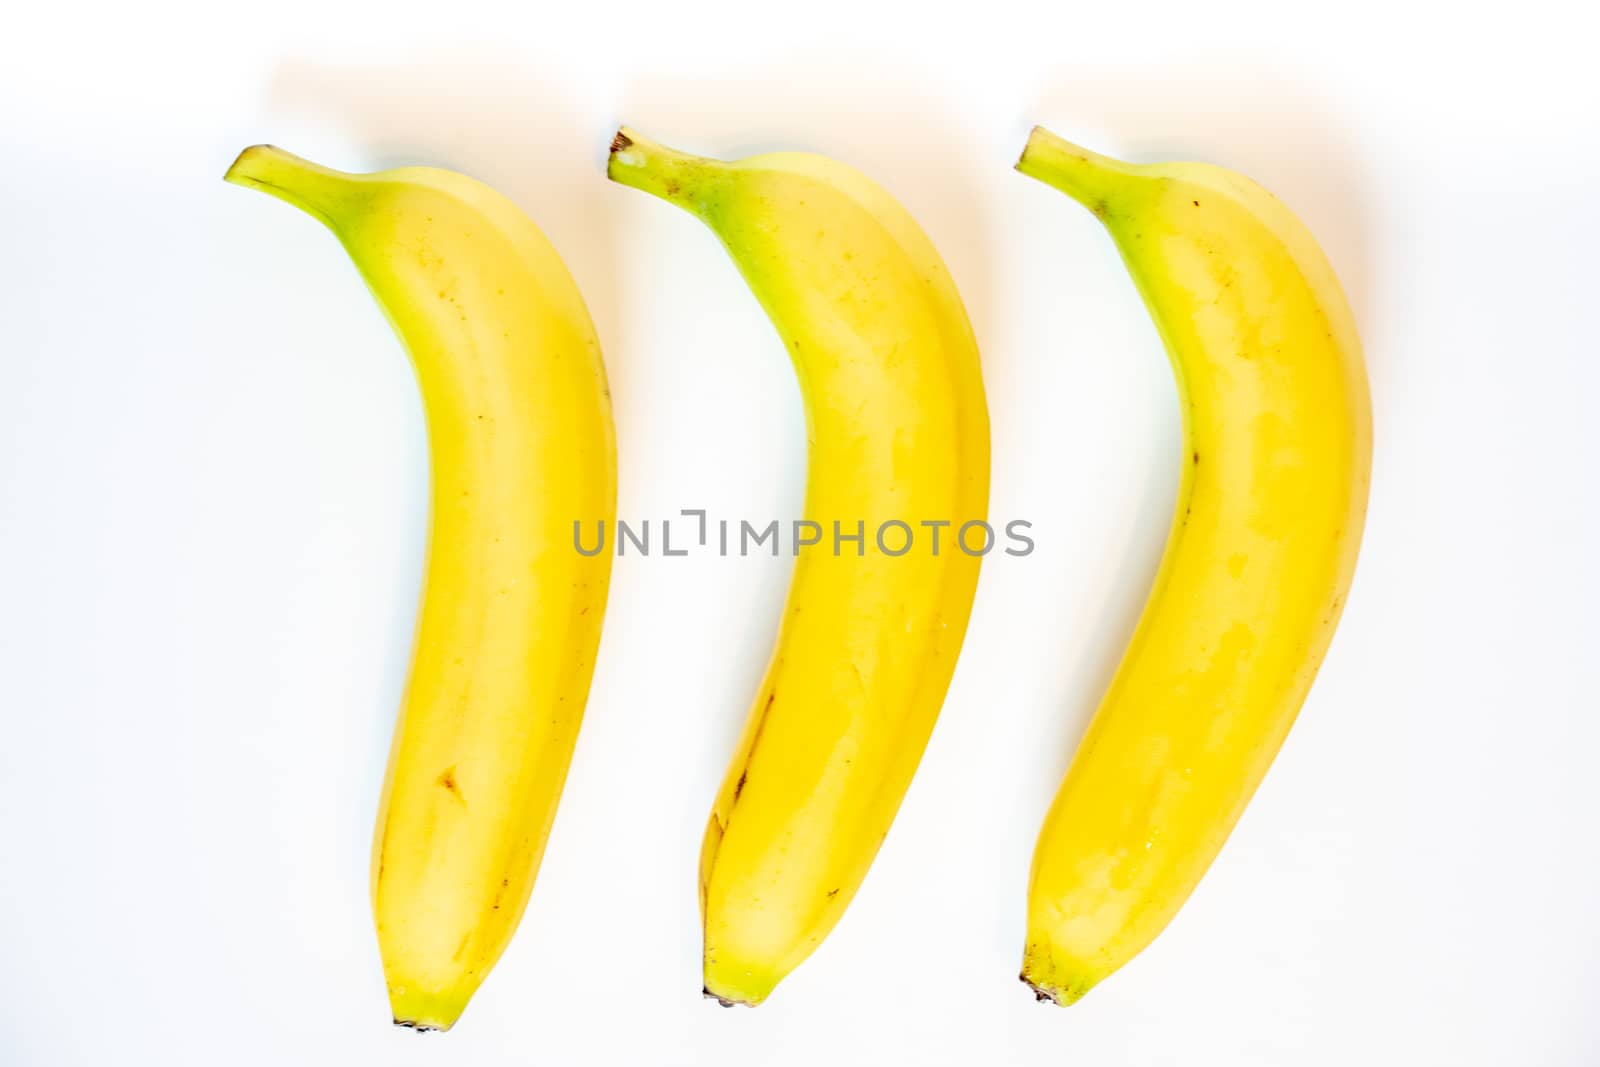 Three whole bananas laid in a row against a plain whit background